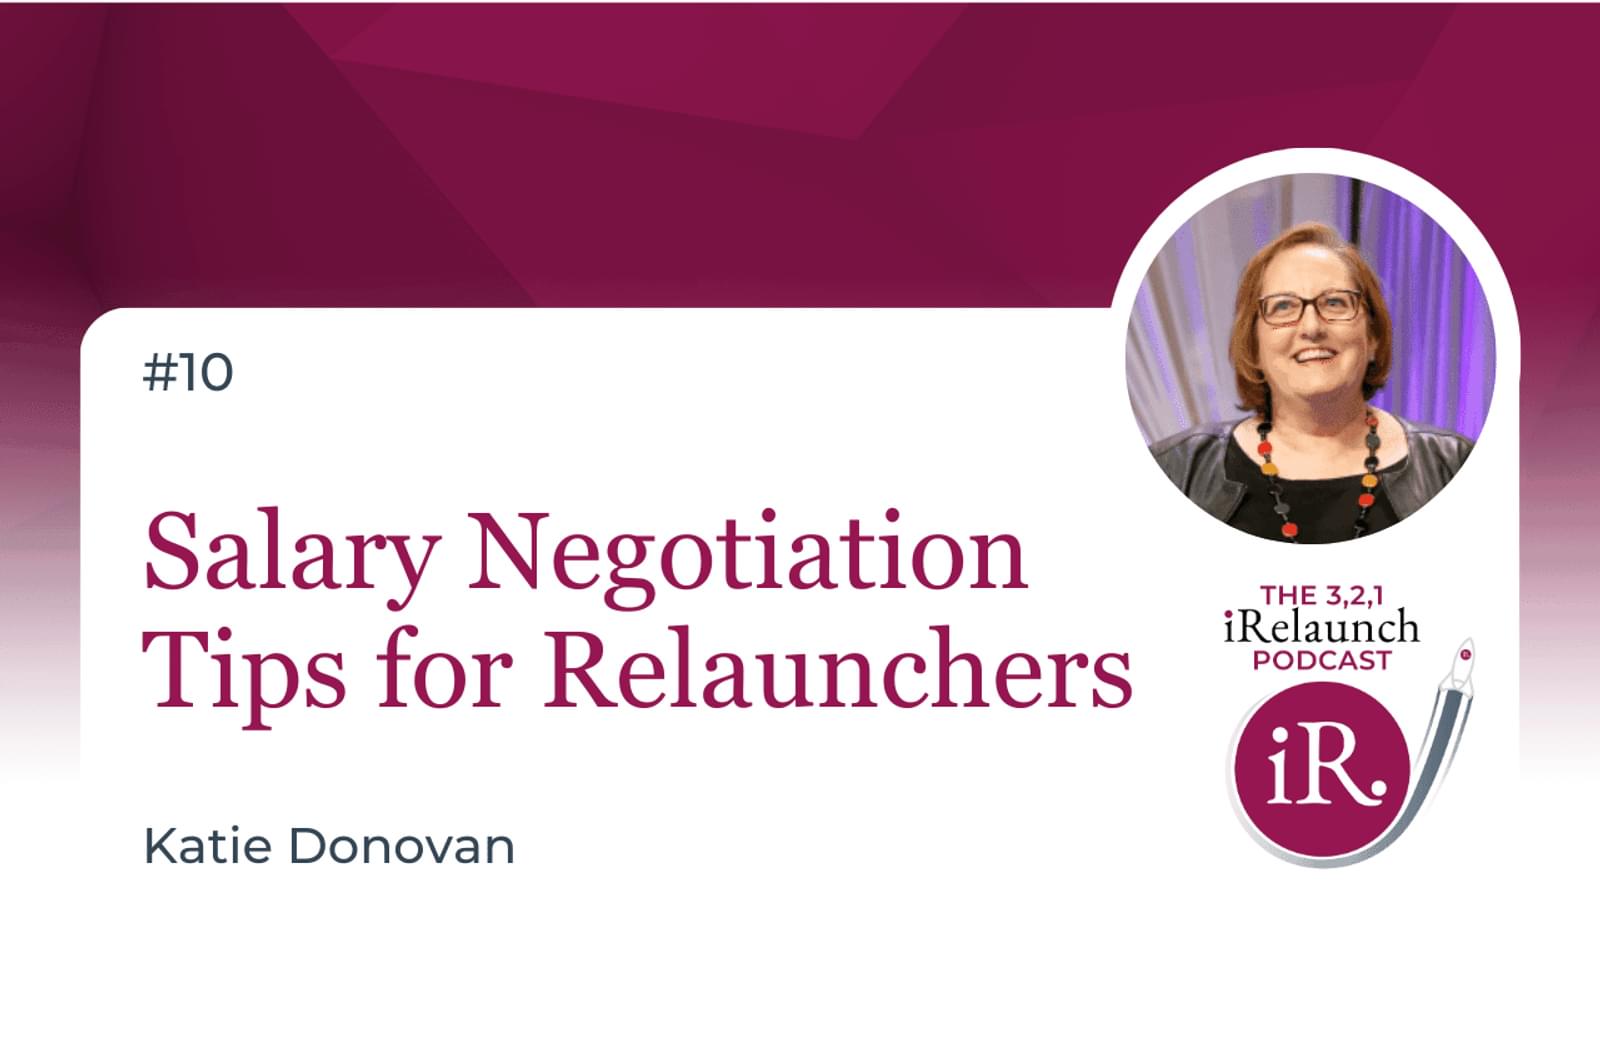 3, 2, 1 iRelaunch Podcast Thumbnail for Episode #10 with Katie Donovan's headshot. The episode's title is: "Salary Negotiation Tips for Relaunchers"